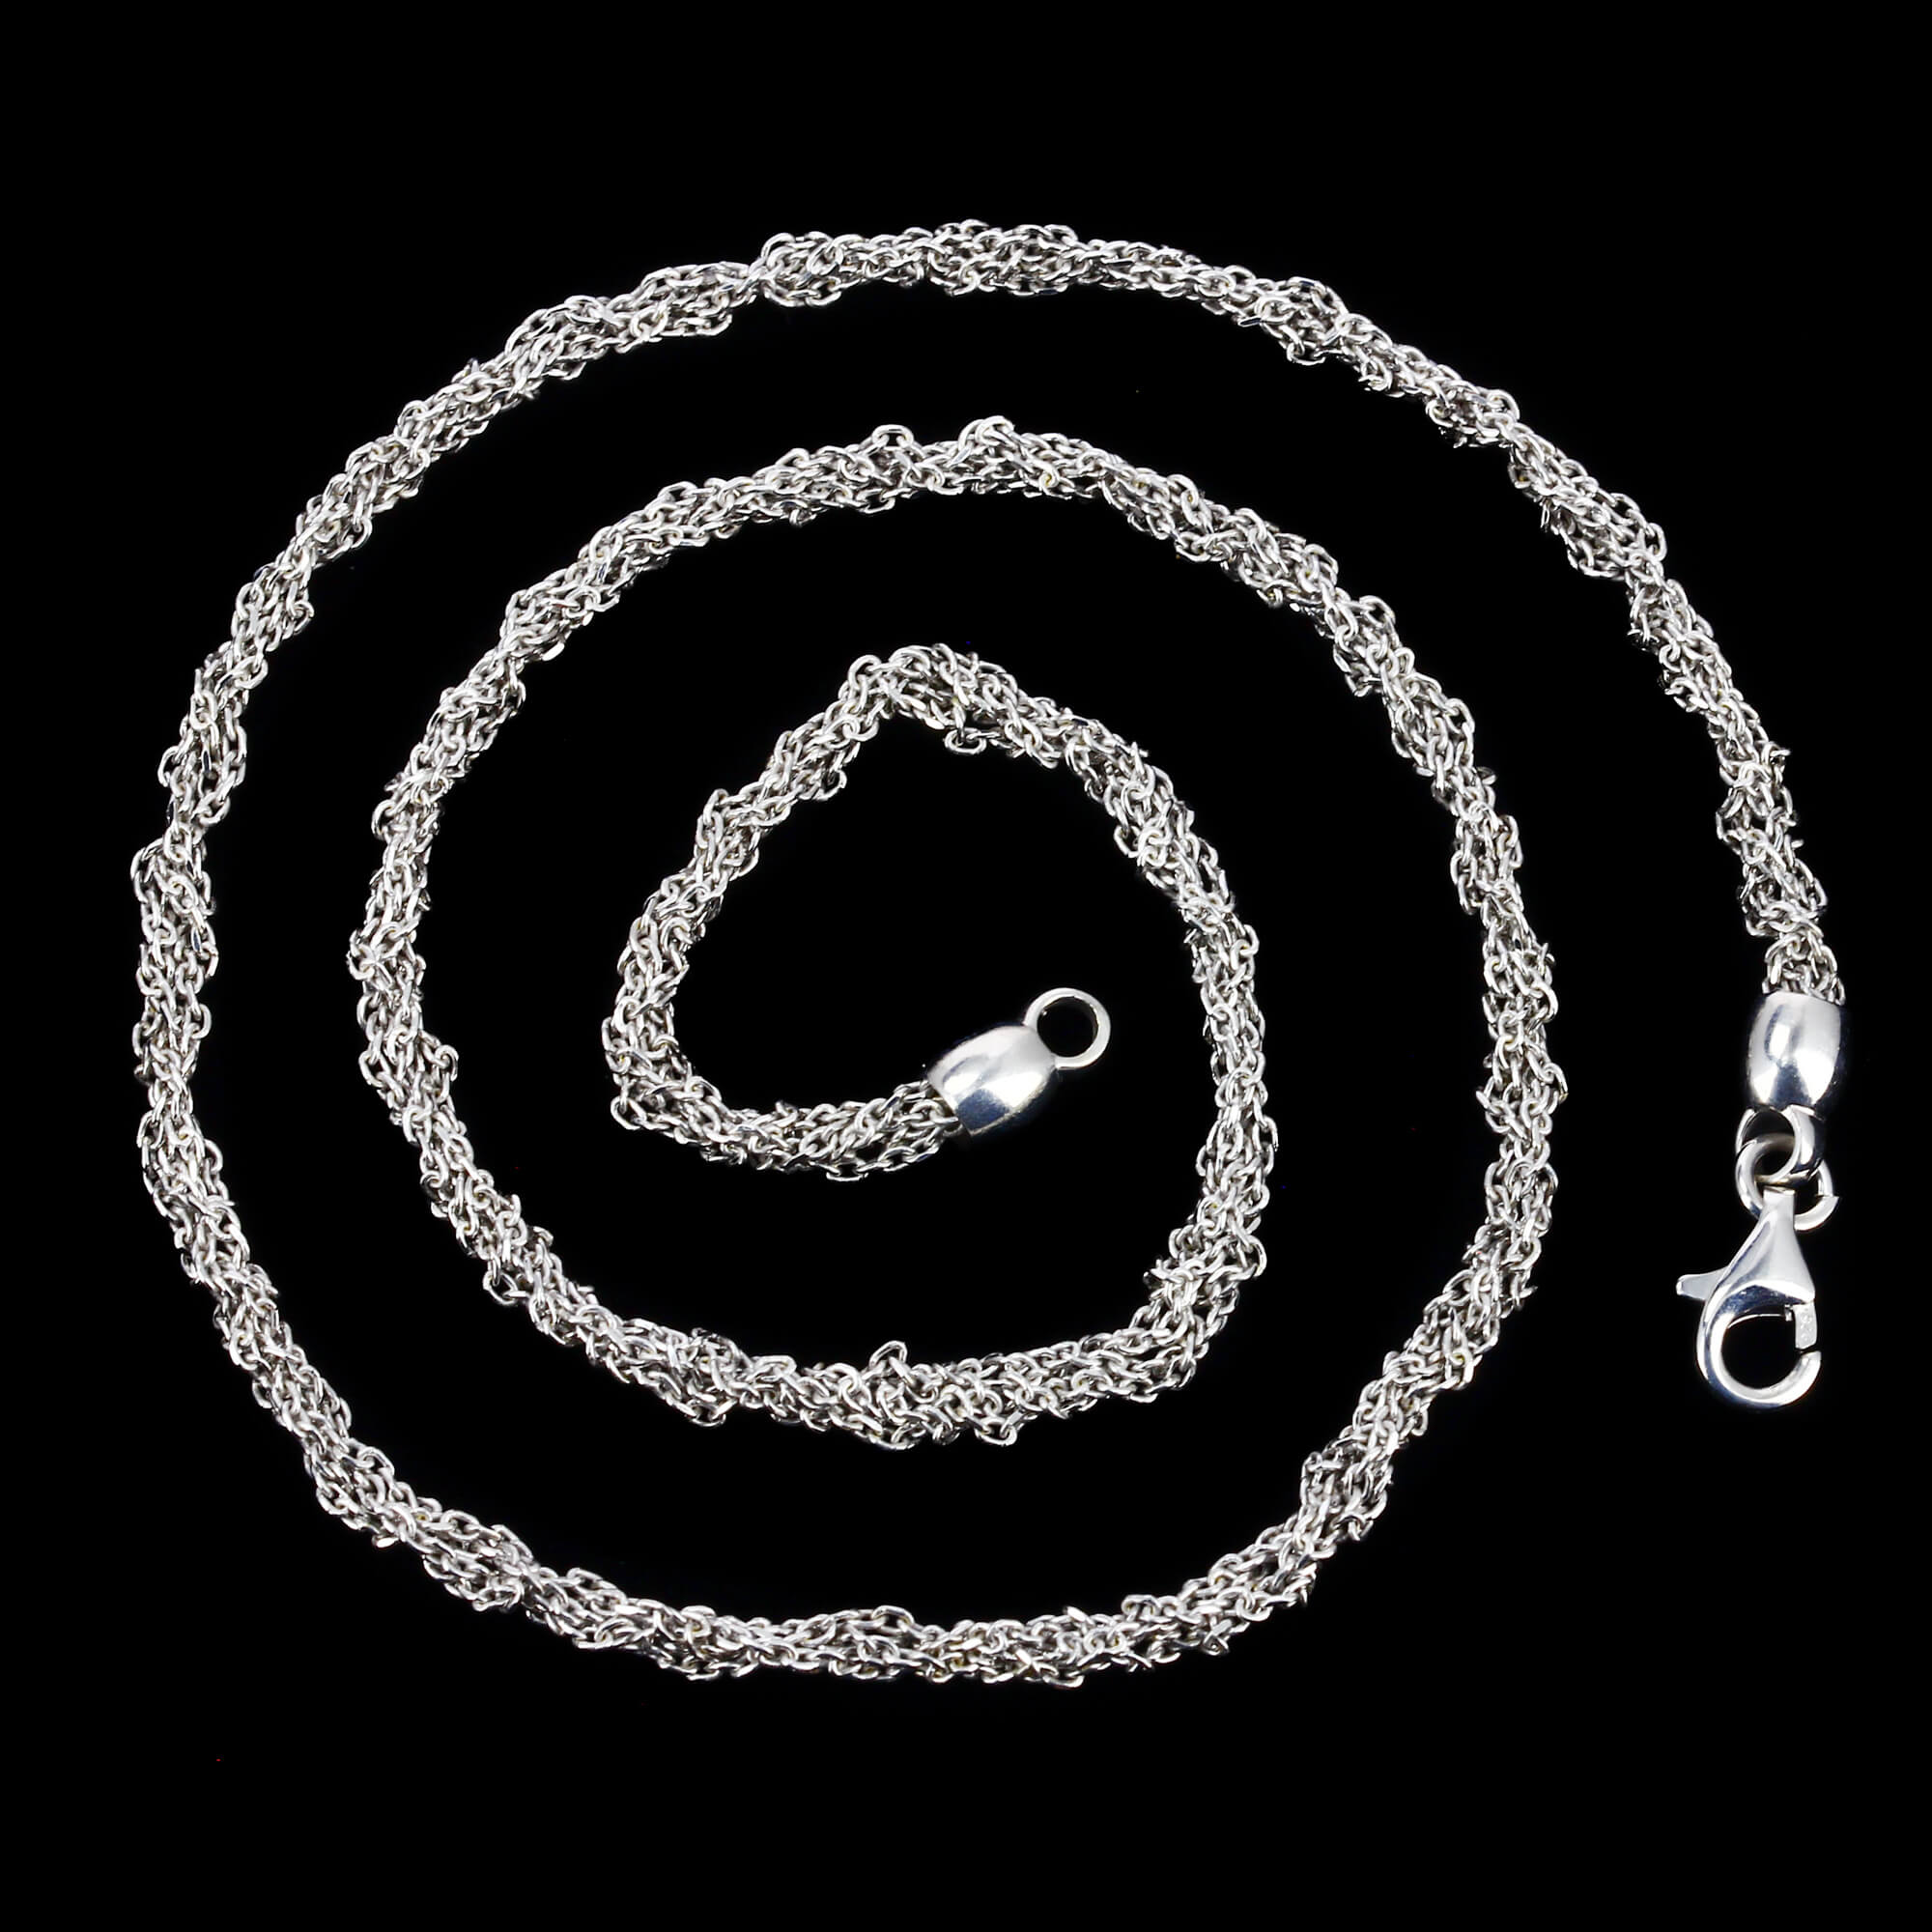 Short intertwined chain of silver